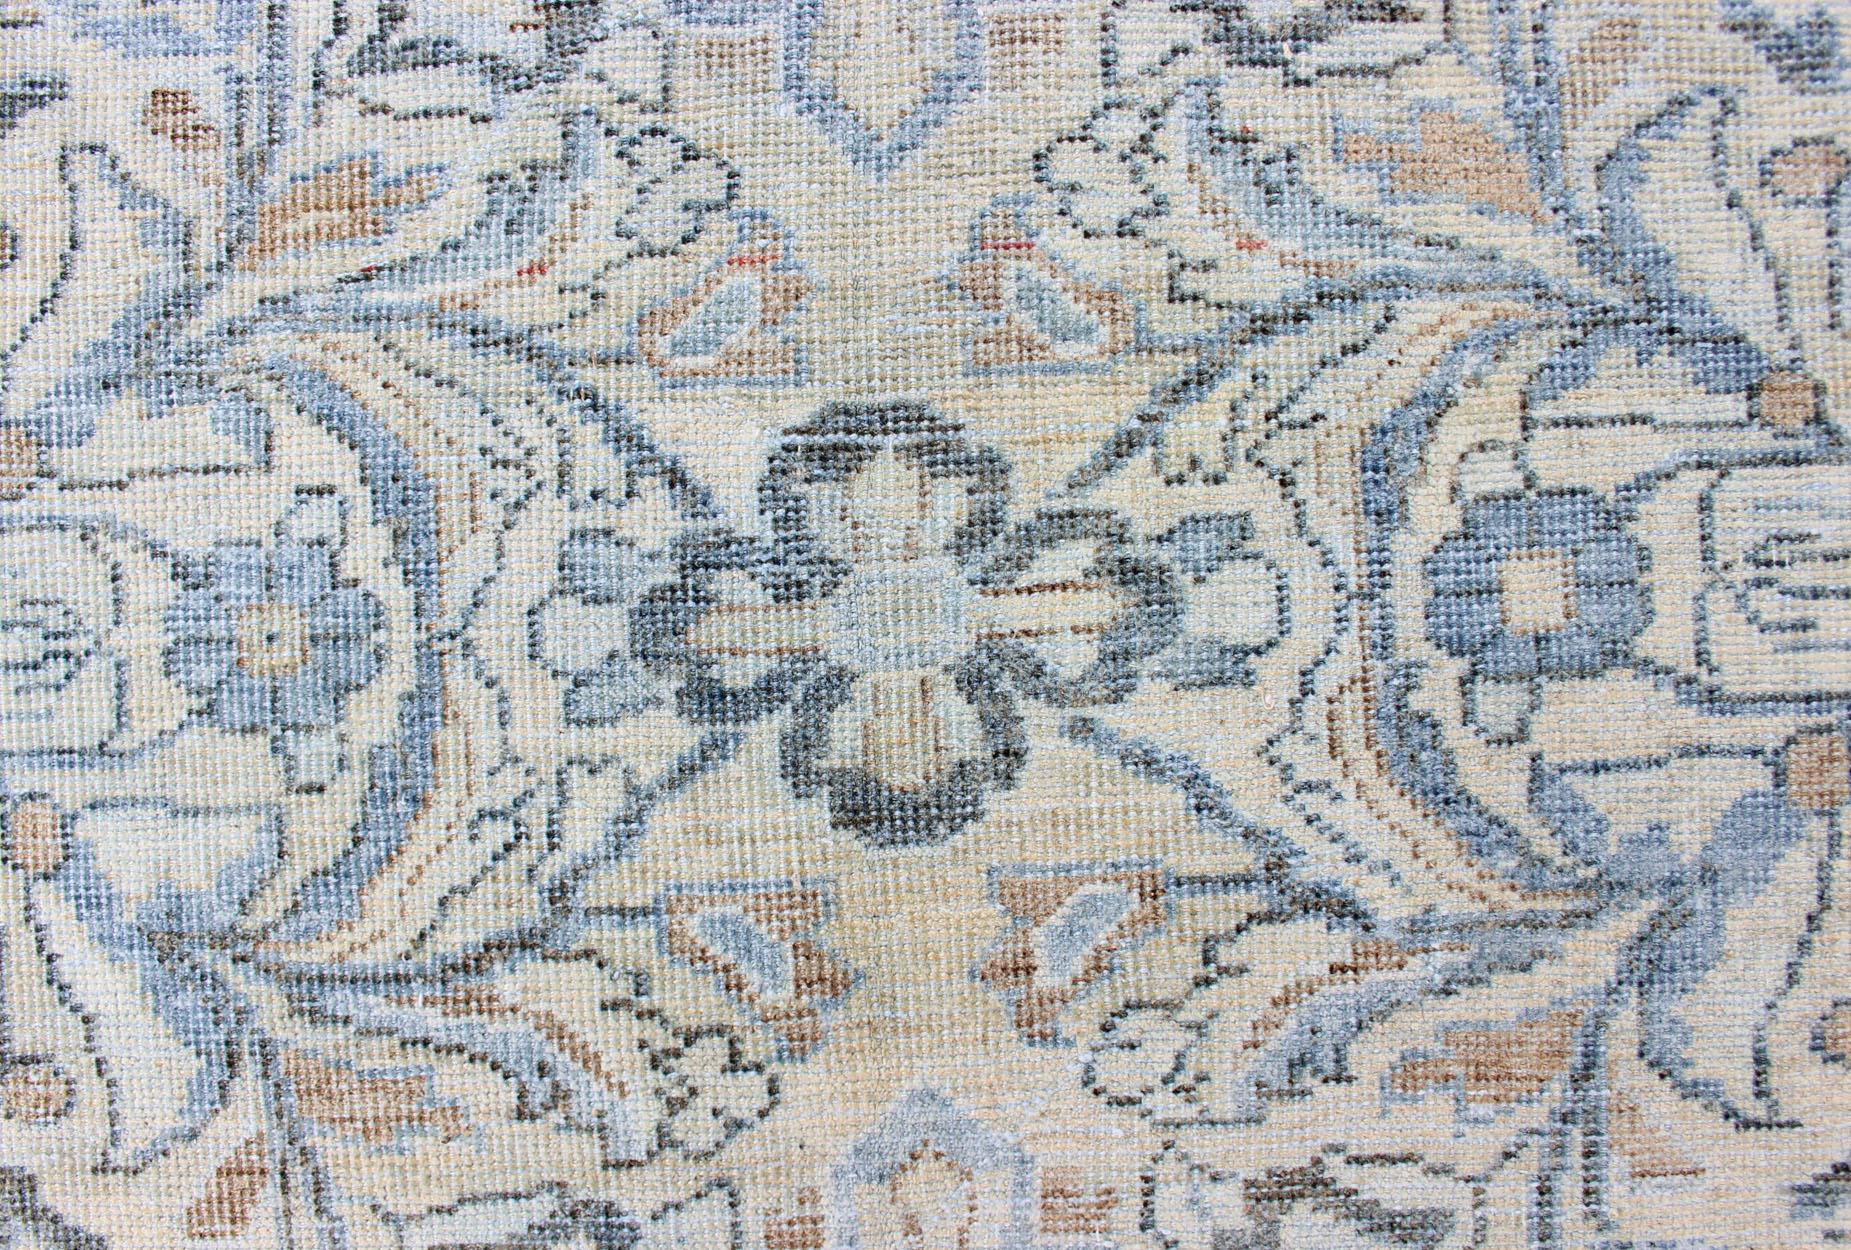 Antique Persian Mahal Rug with Sub Floral Design in Blue, Charcoal & Cream 11